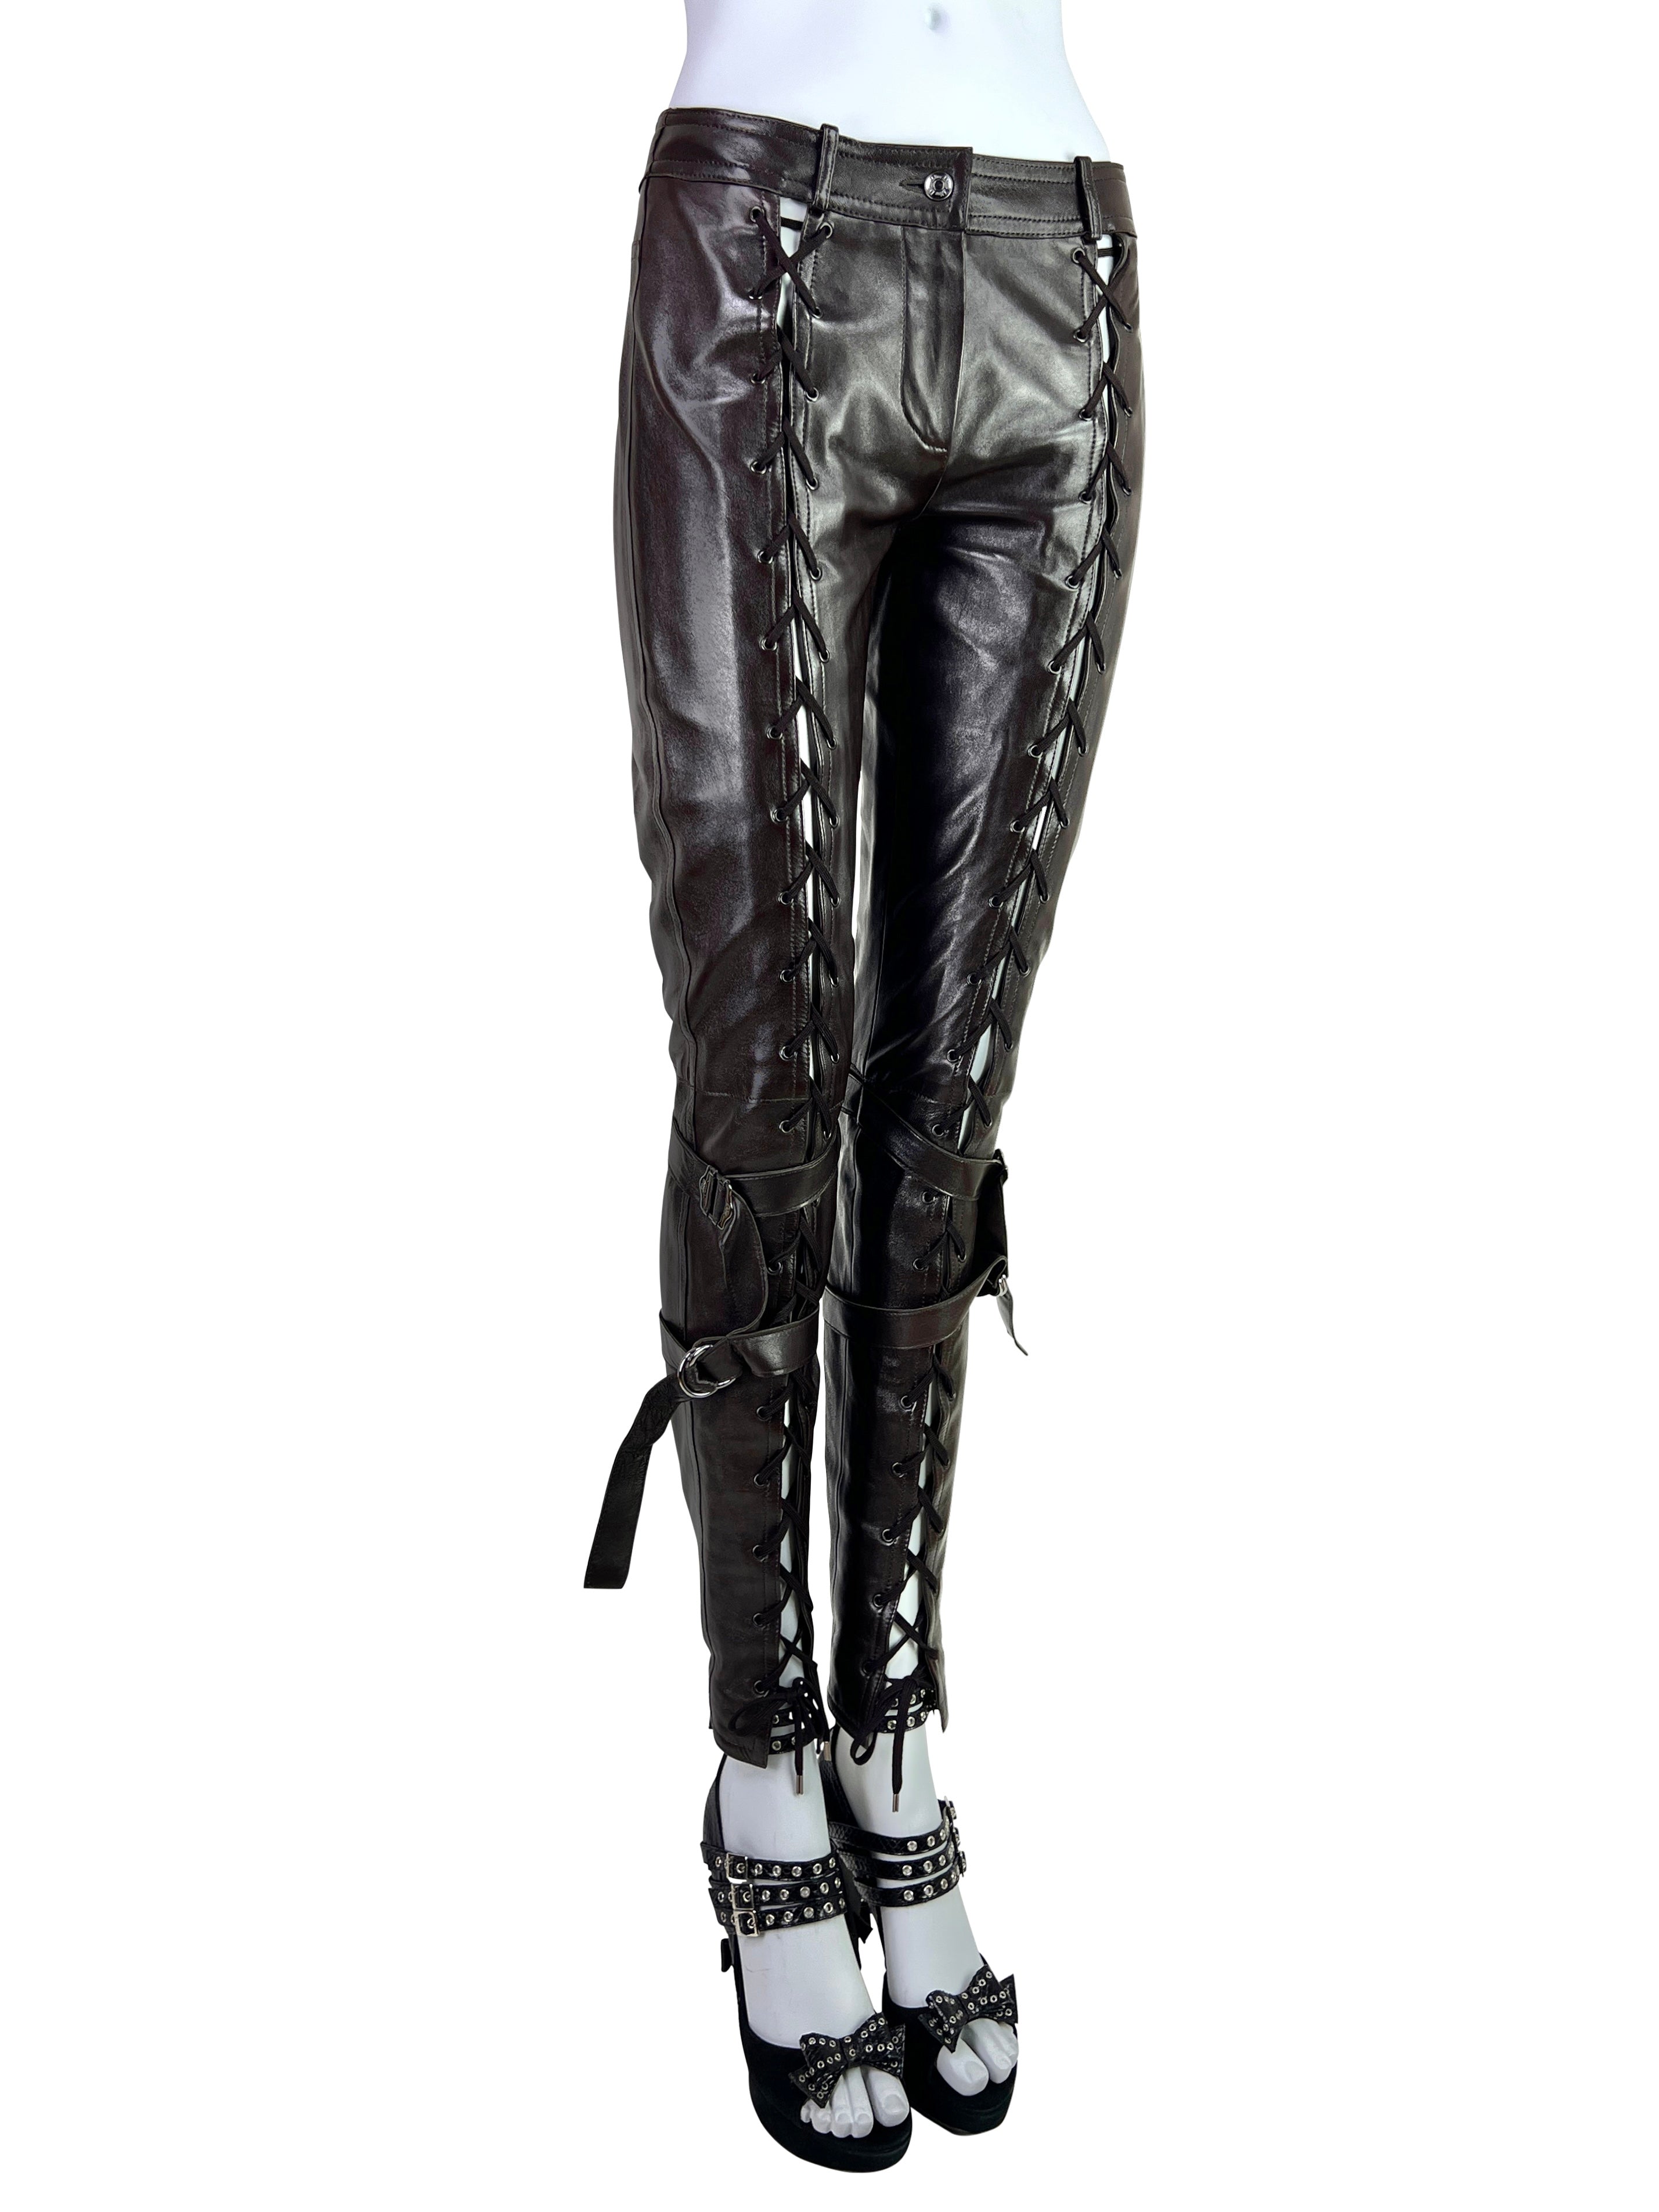 Dior Fall 2003 Leather Lace-Up Pants in Dark Chocolate